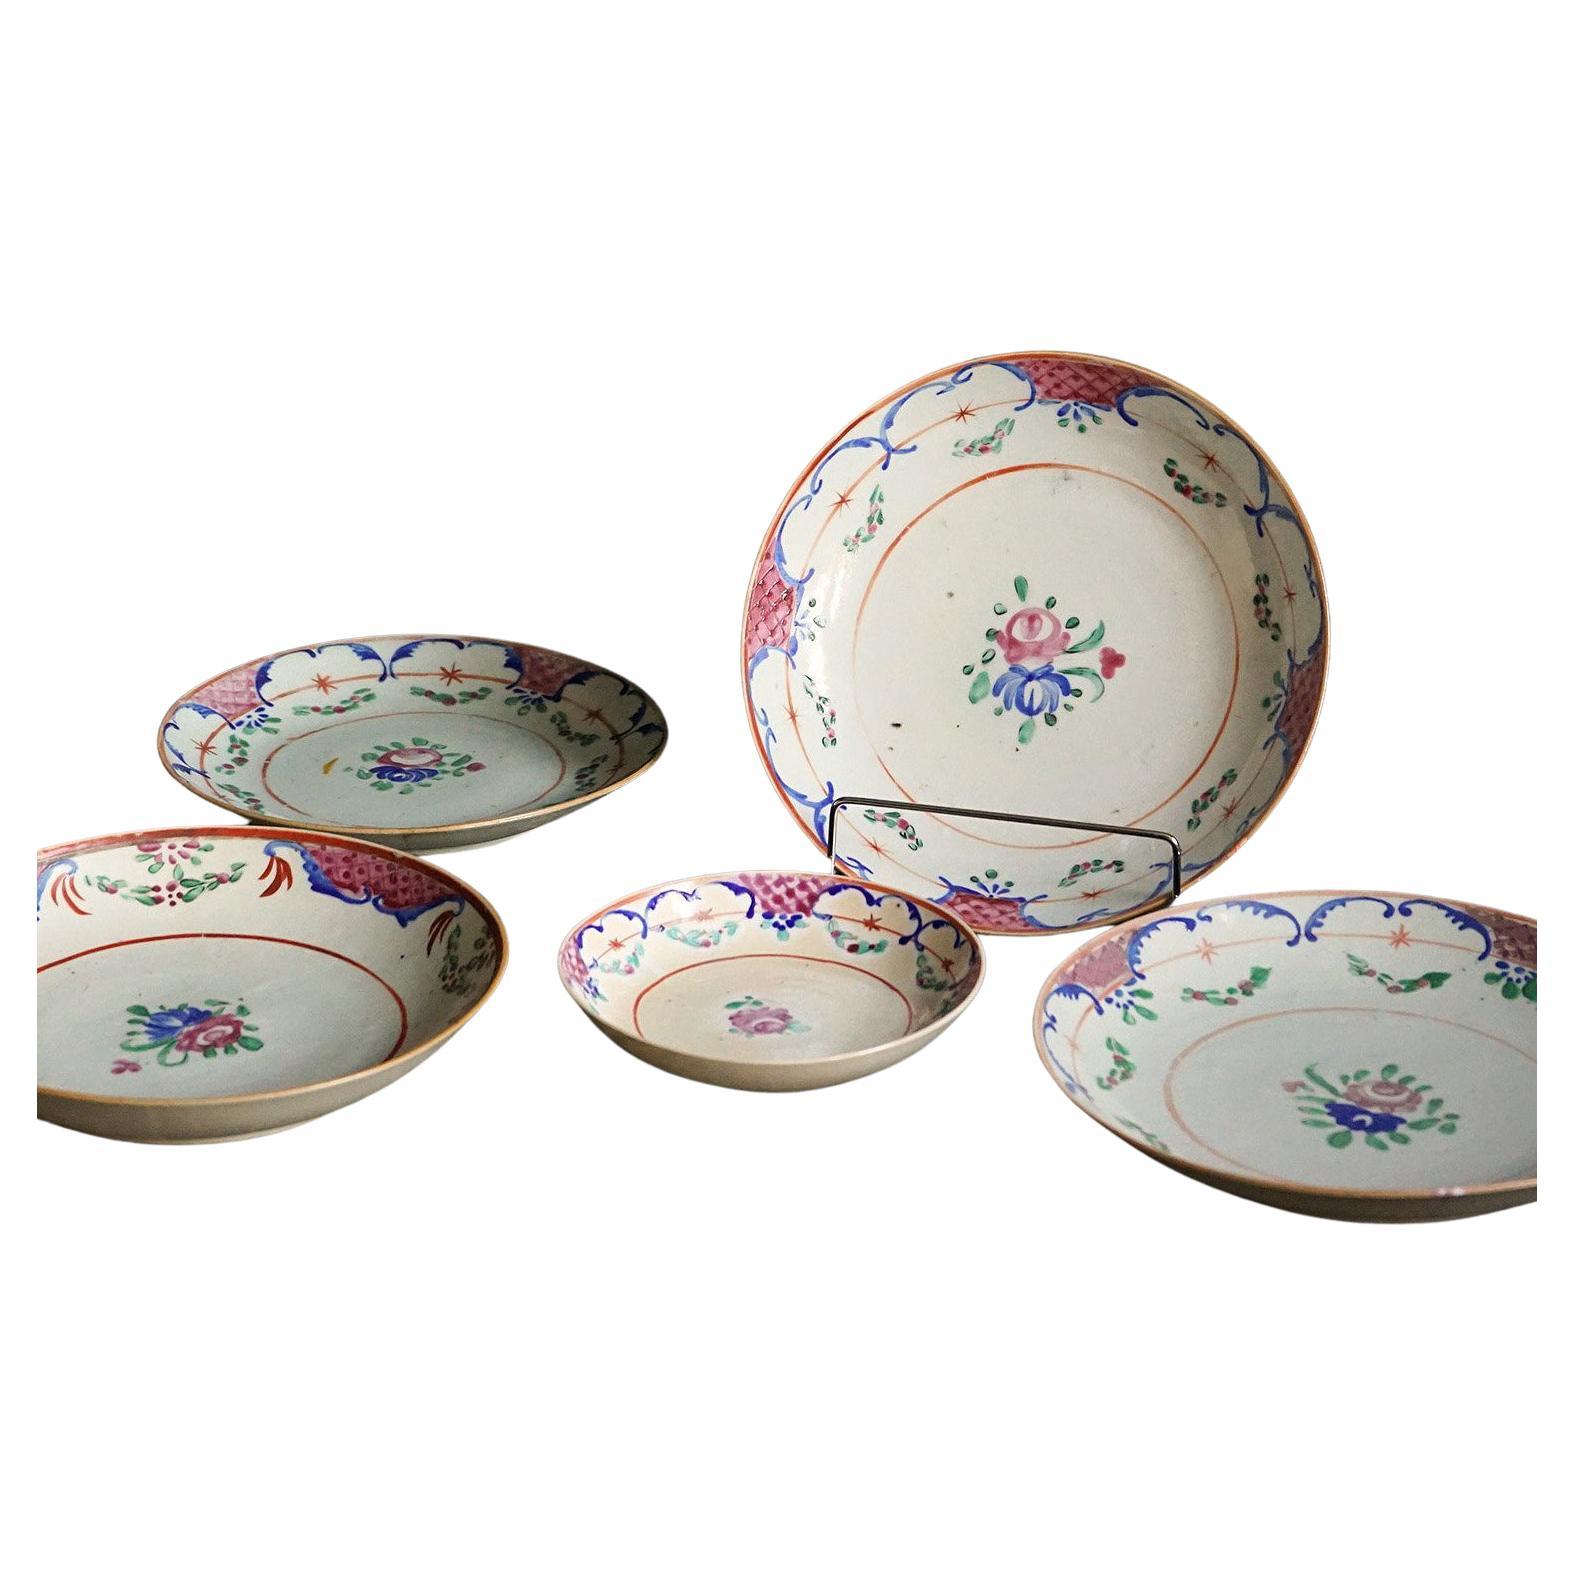 Collection of Antique Chinese Export Porcelain Bowls, Early 19th Century For Sale